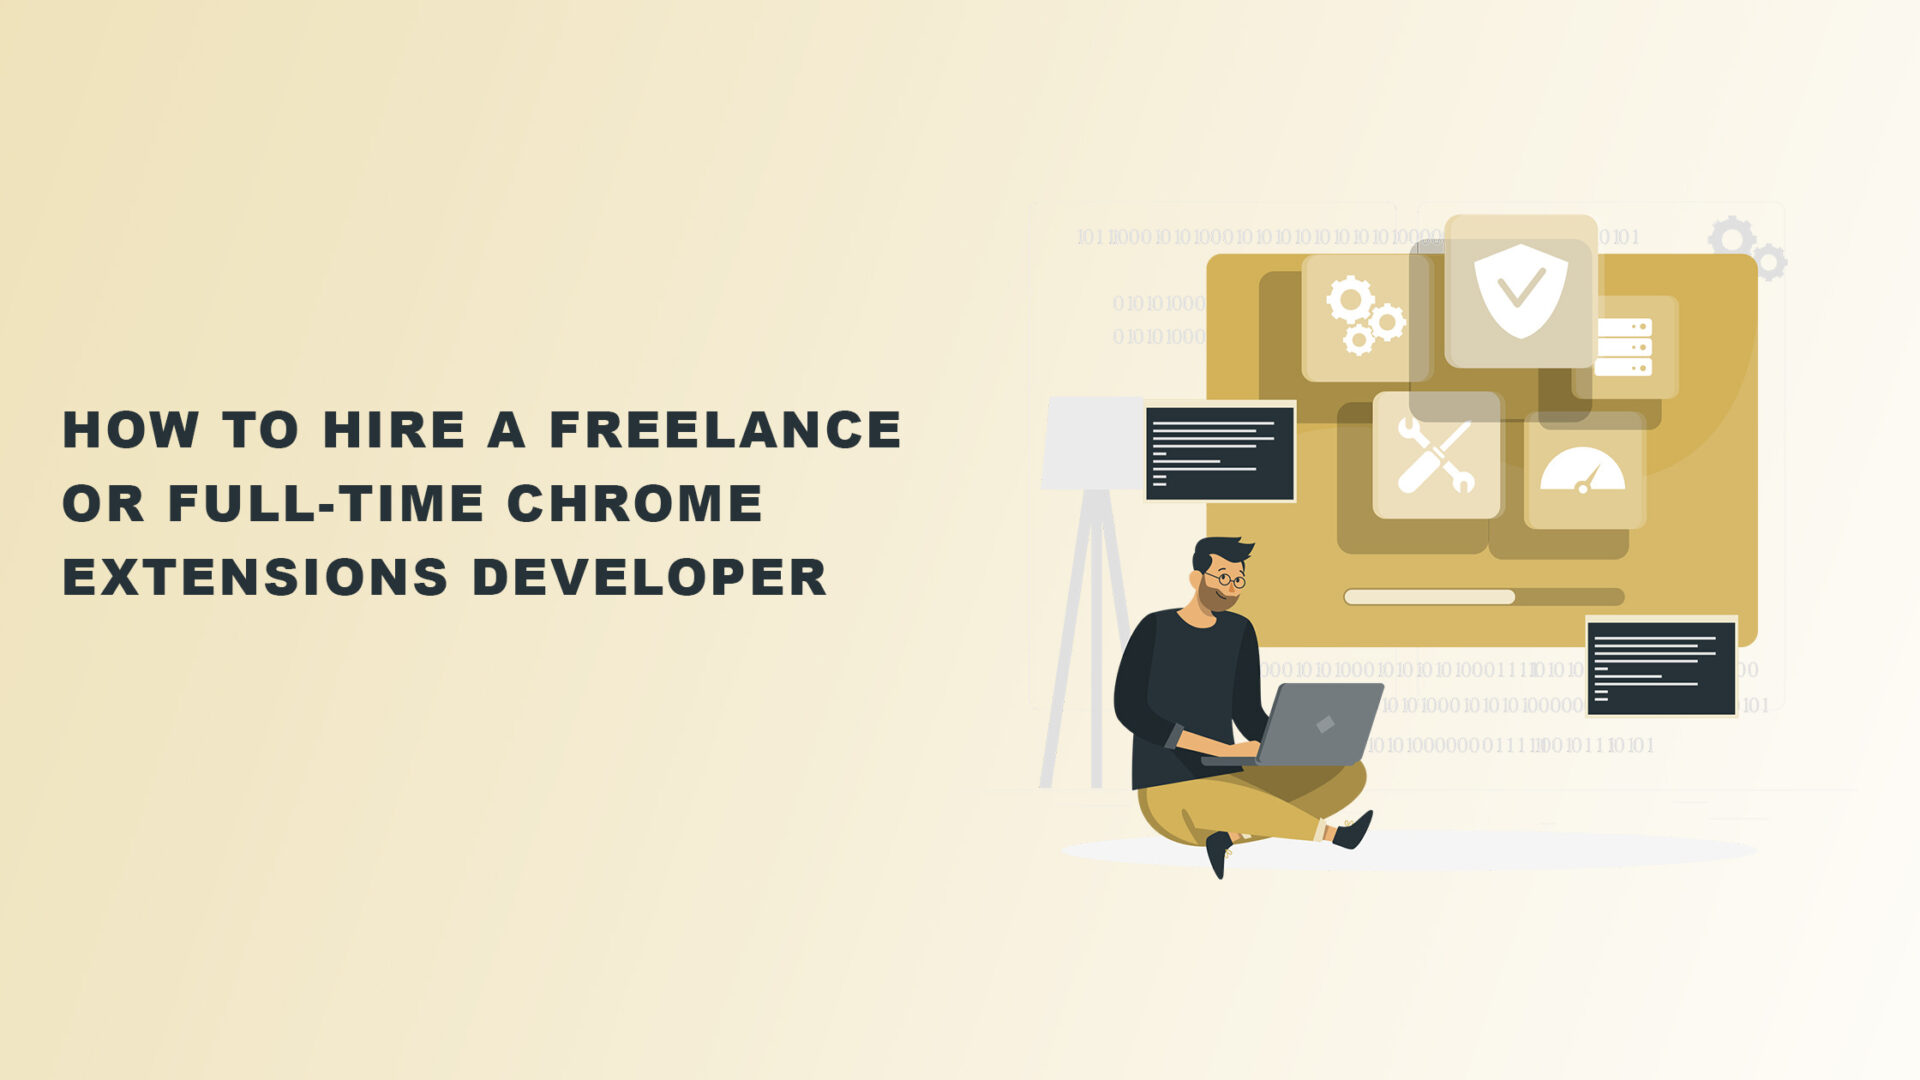 How to Hire a Freelance or Full-Time Chrome Extensions Developer